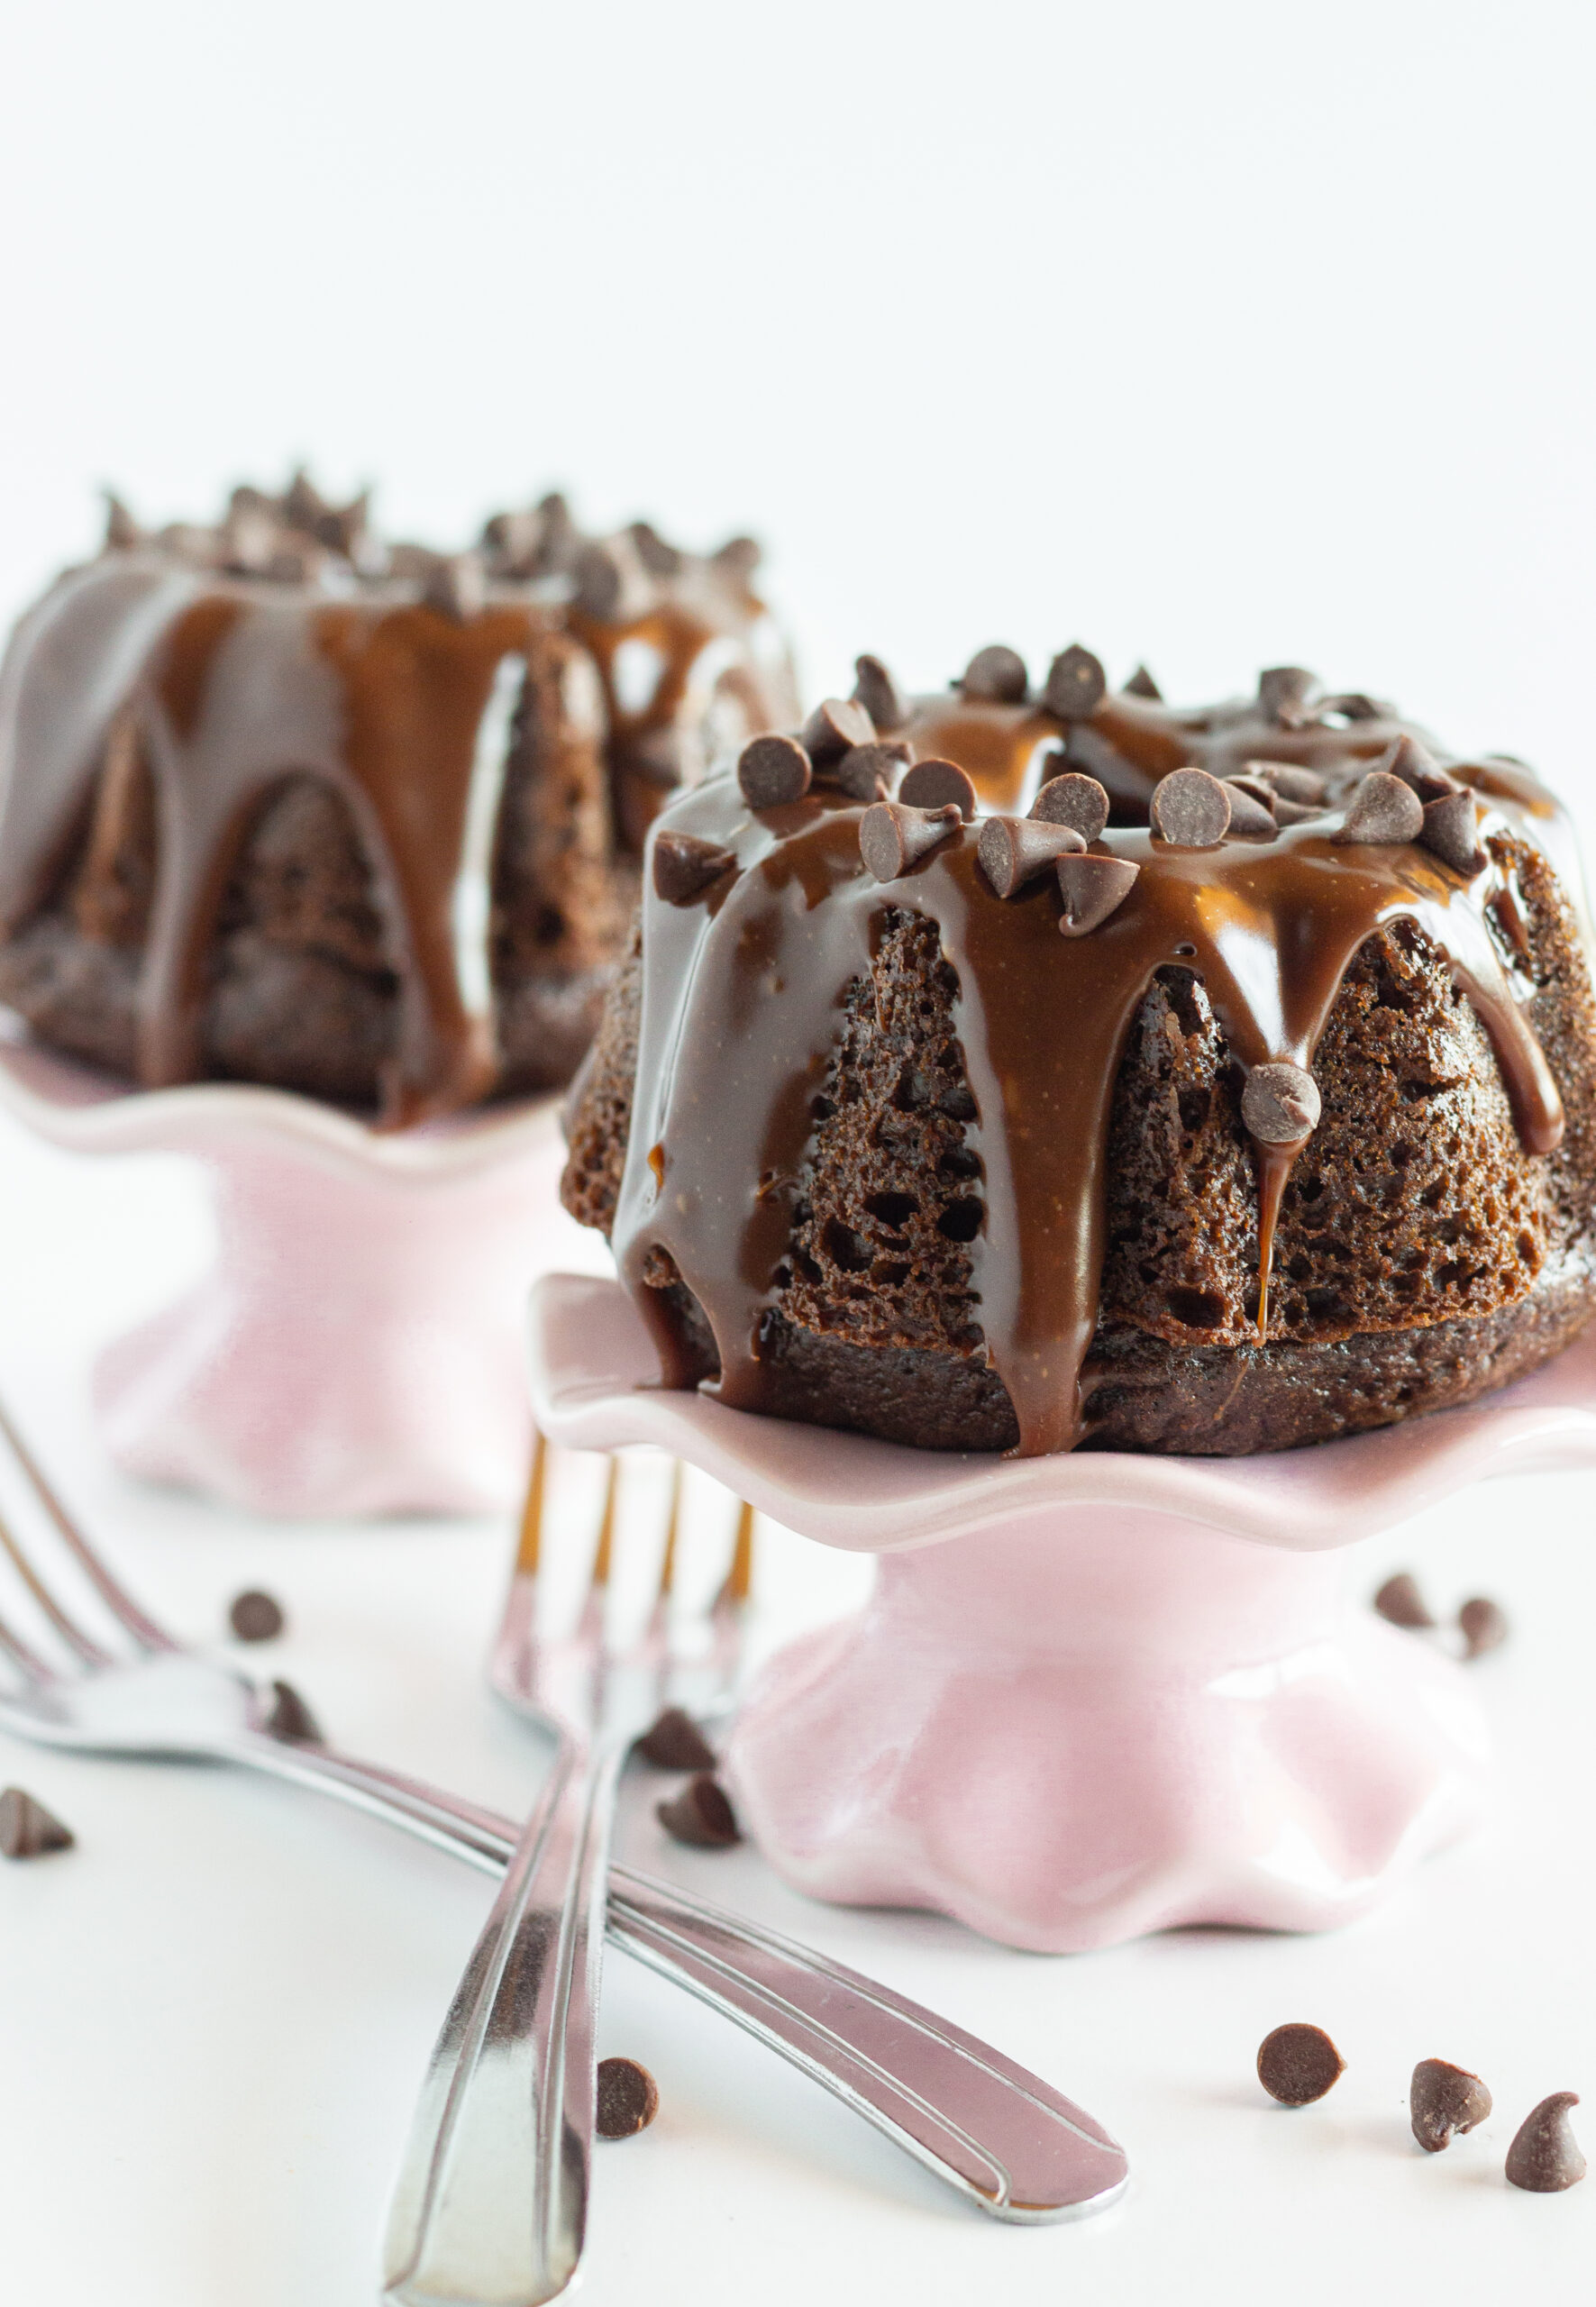 Two Mini Chocolate Bundt Cakes on small pink cake plates with forks.